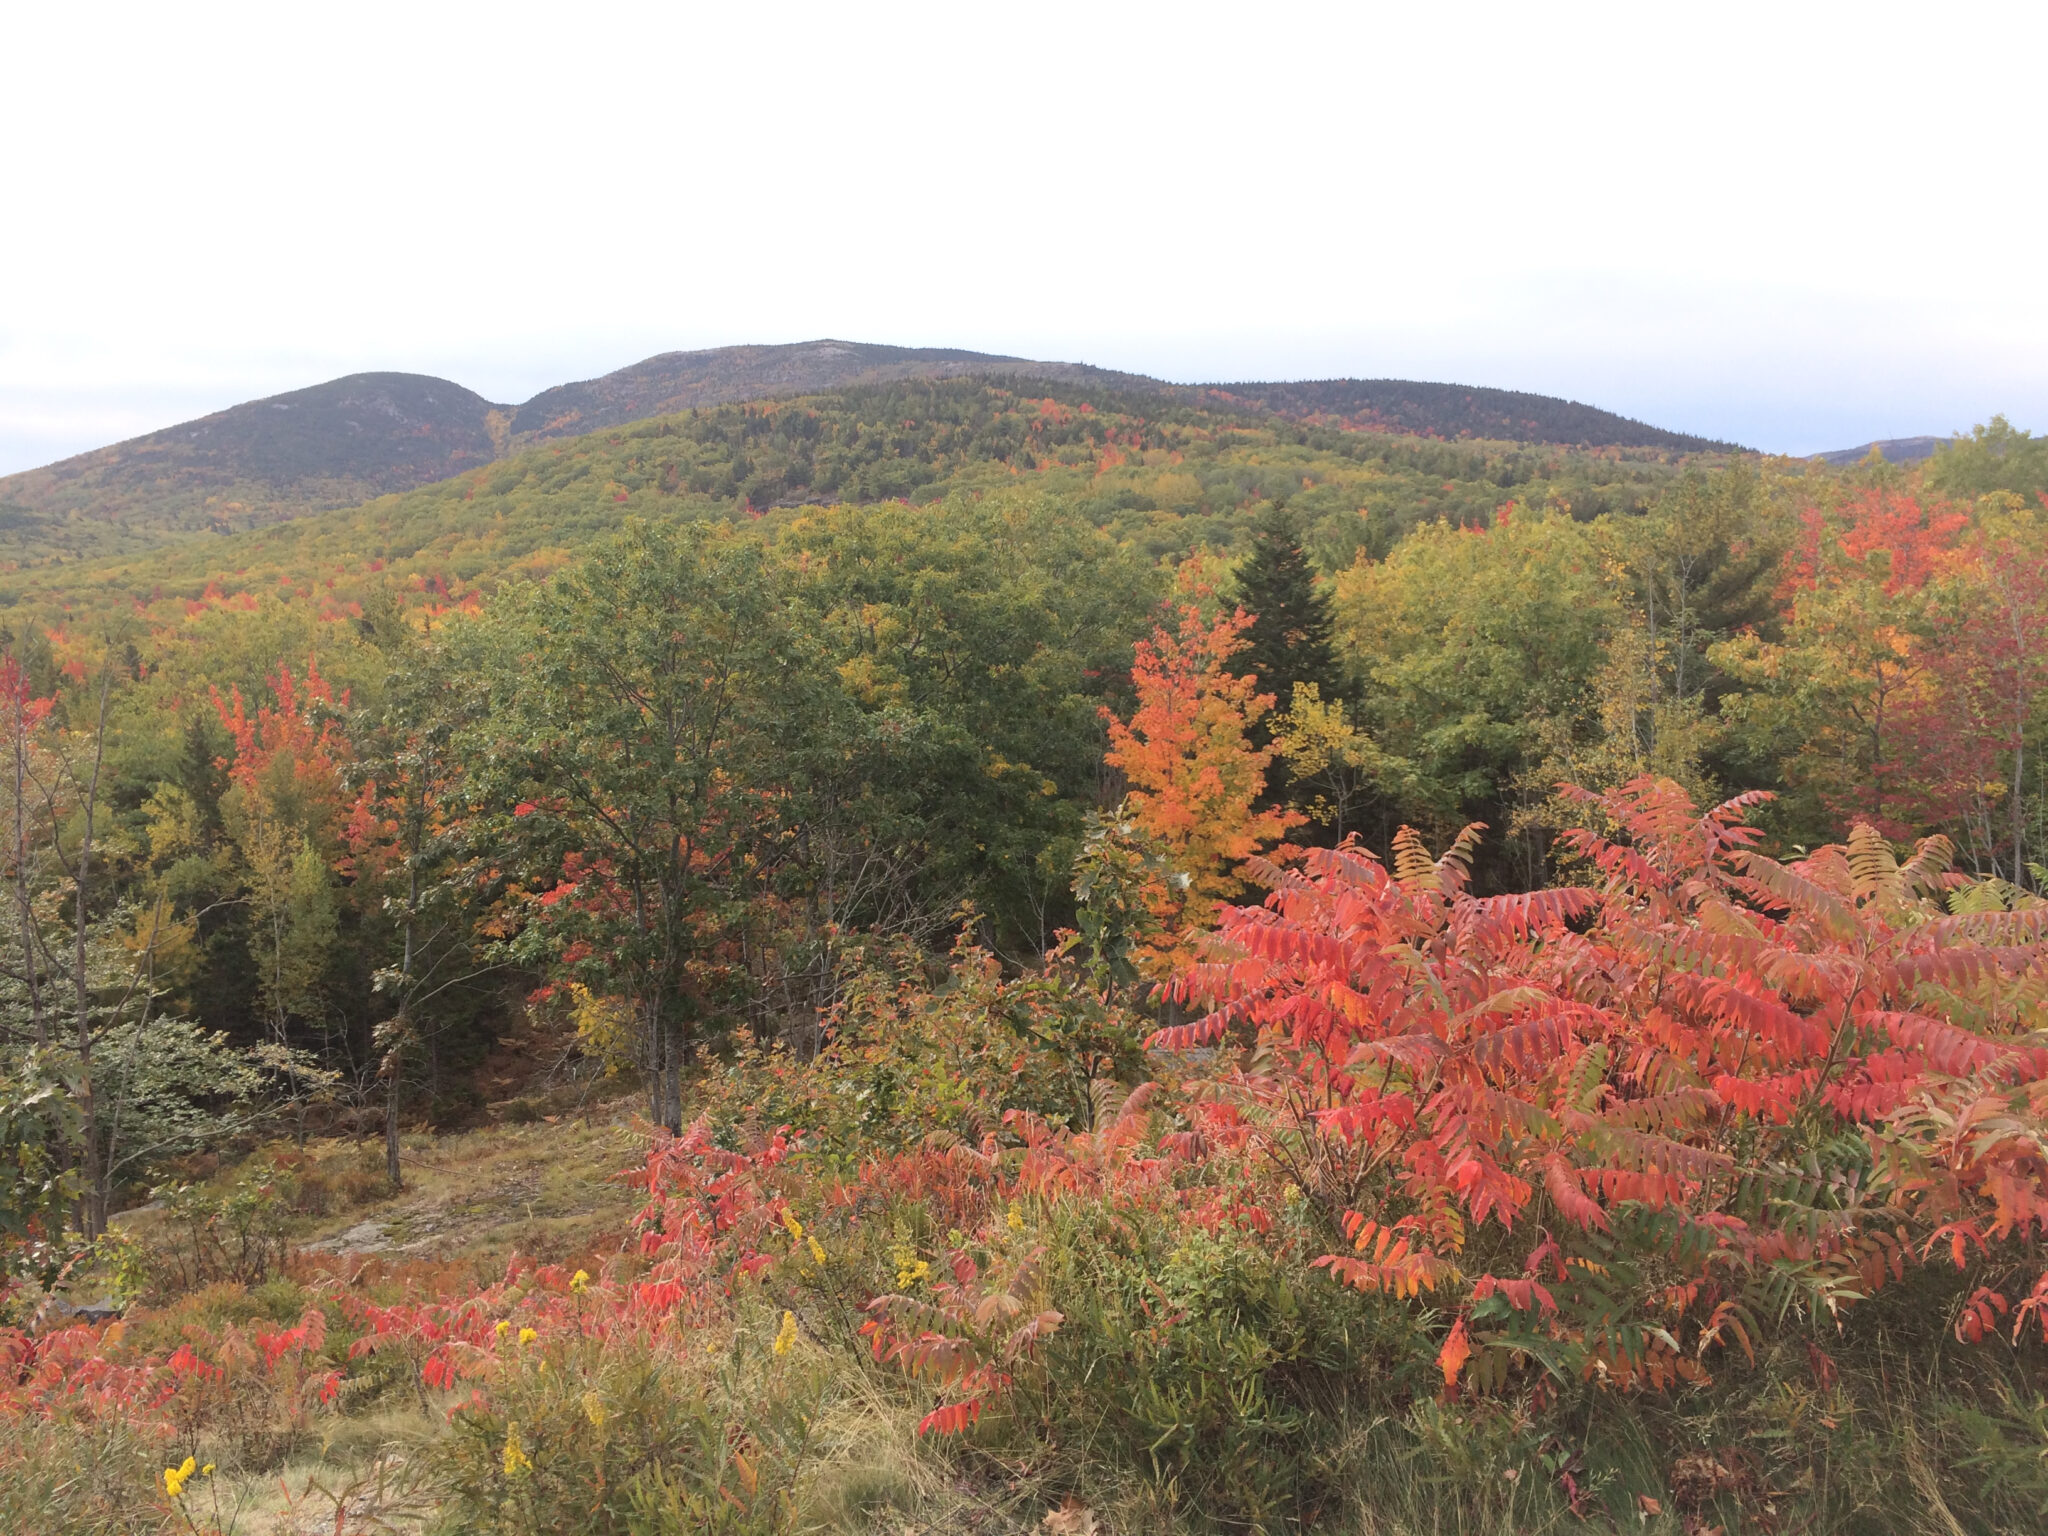 view of Cadillac and Dorr mountains with some leaves red and others green and yellow